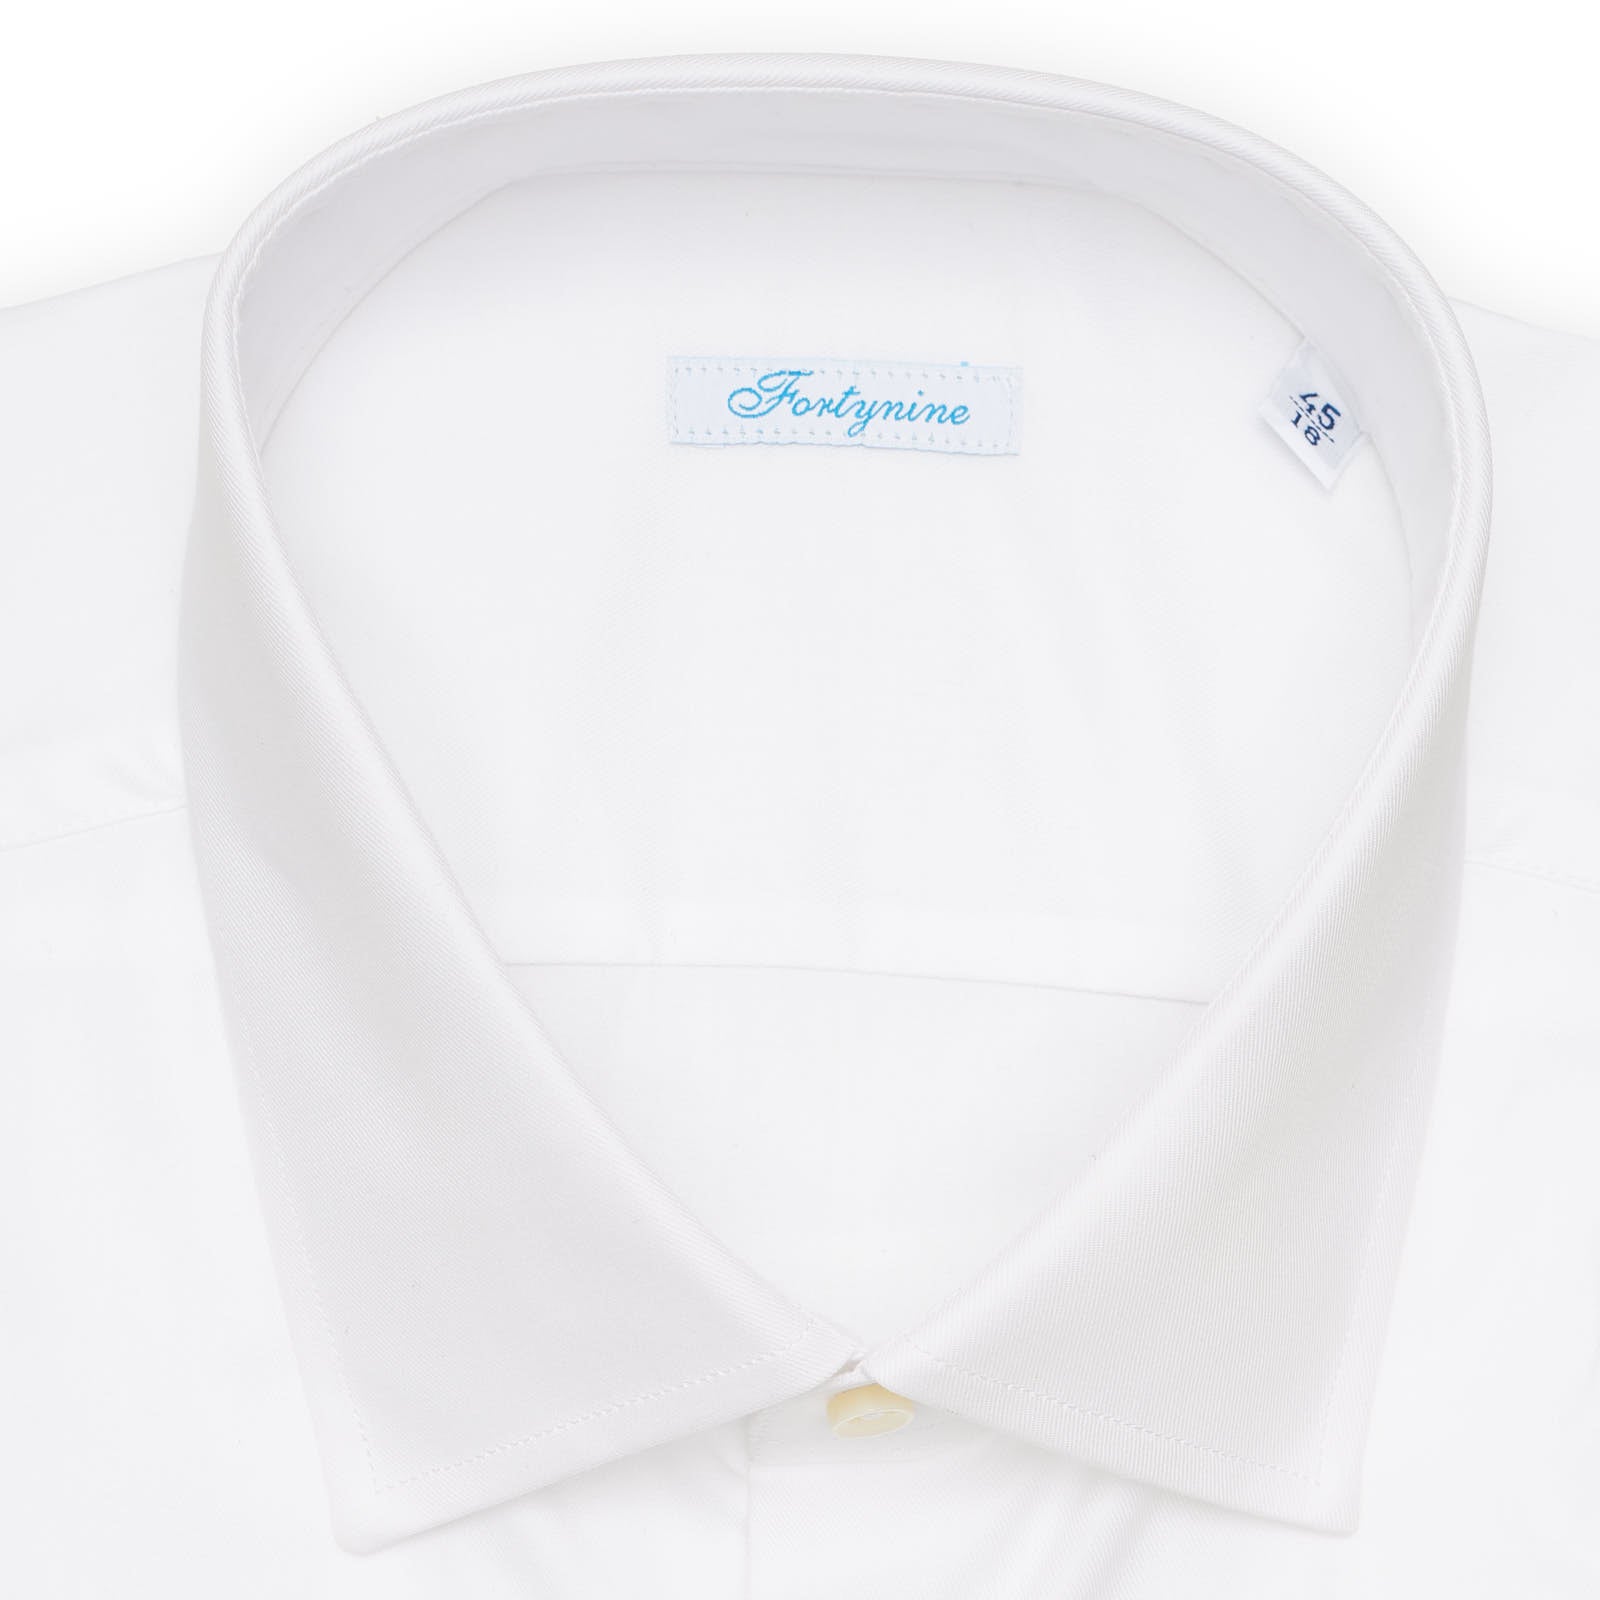 FORTYNINE White Twill Cotton Dress Shirt